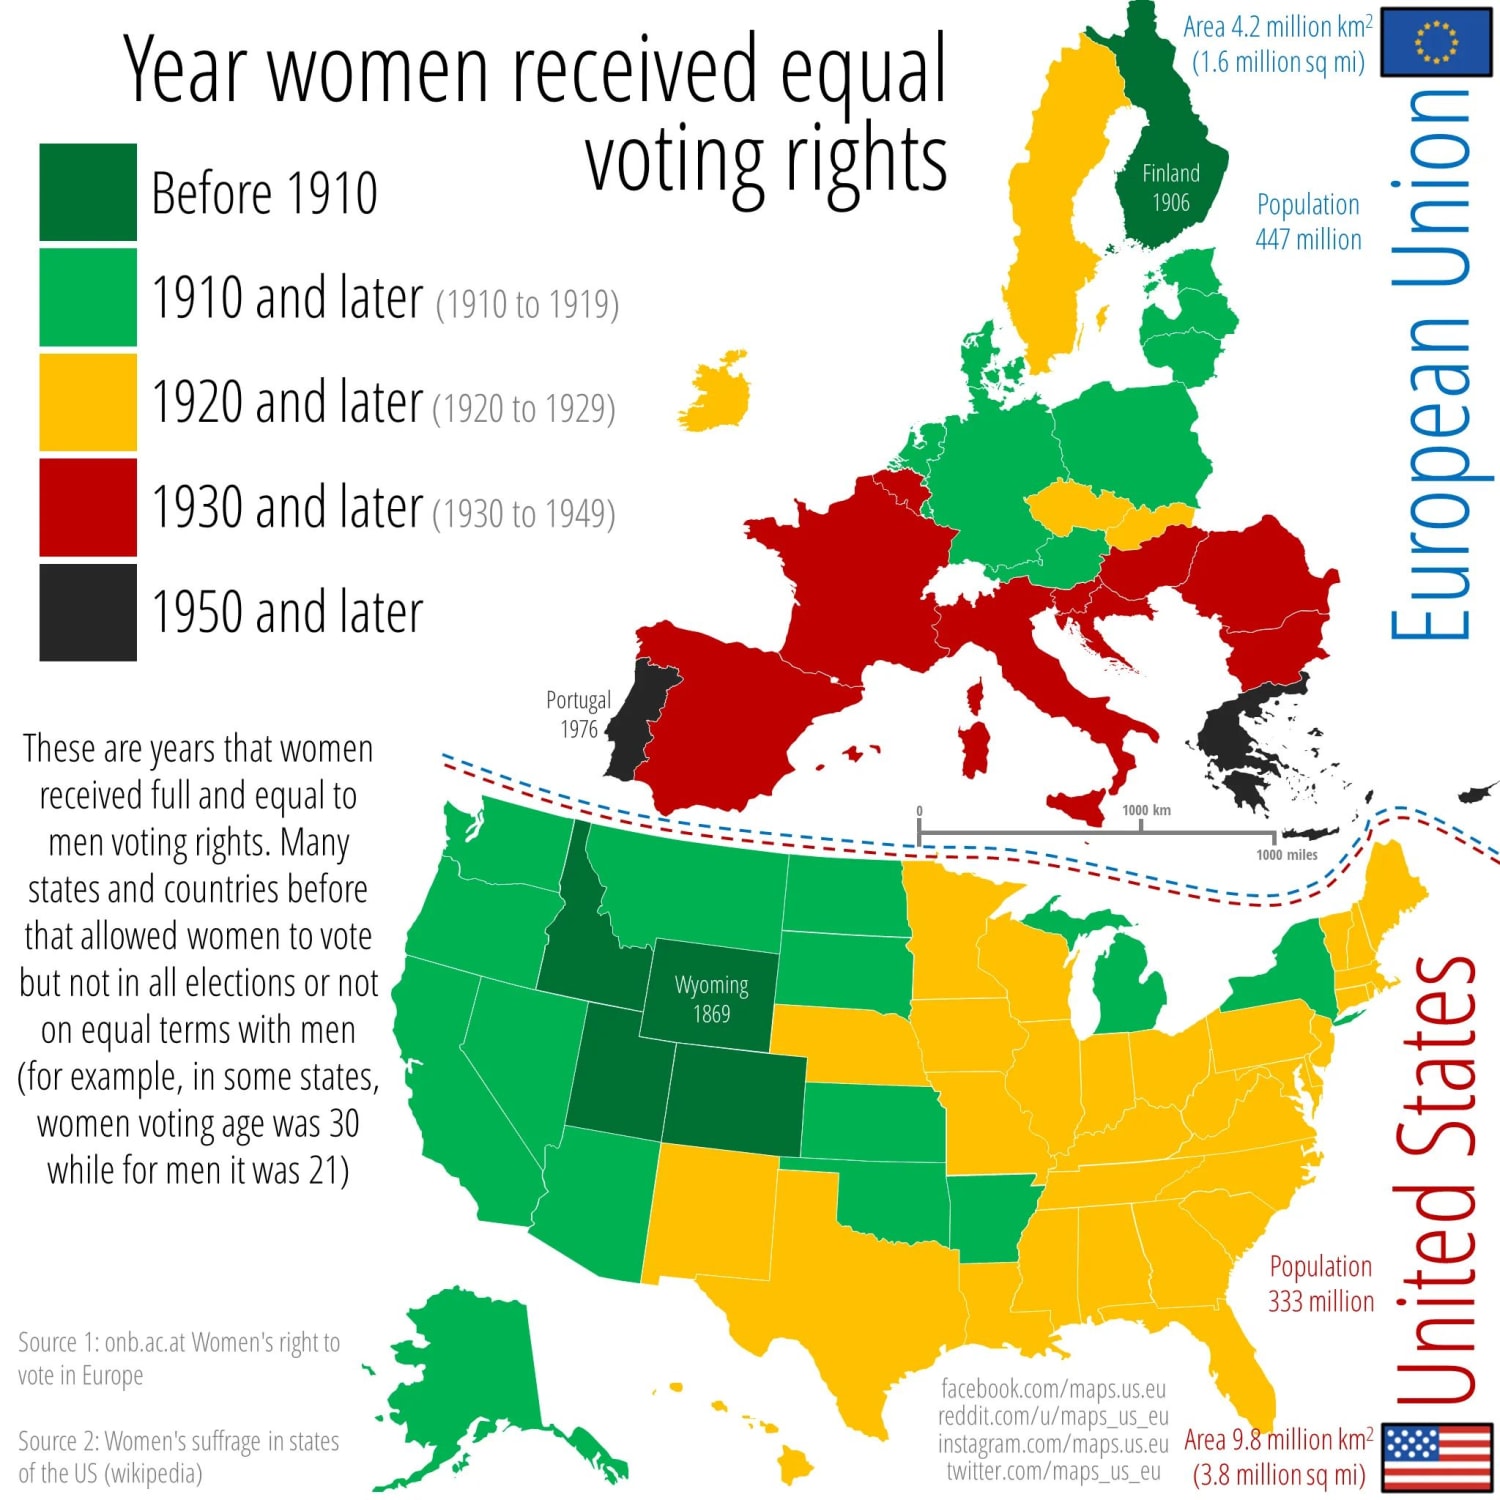 Year women received equal voting rights across the US and the EU. These are years that women received full and equal to men voting rights. Many states and countries before that allowed women to vote but not in all elections or not on equal terms with men